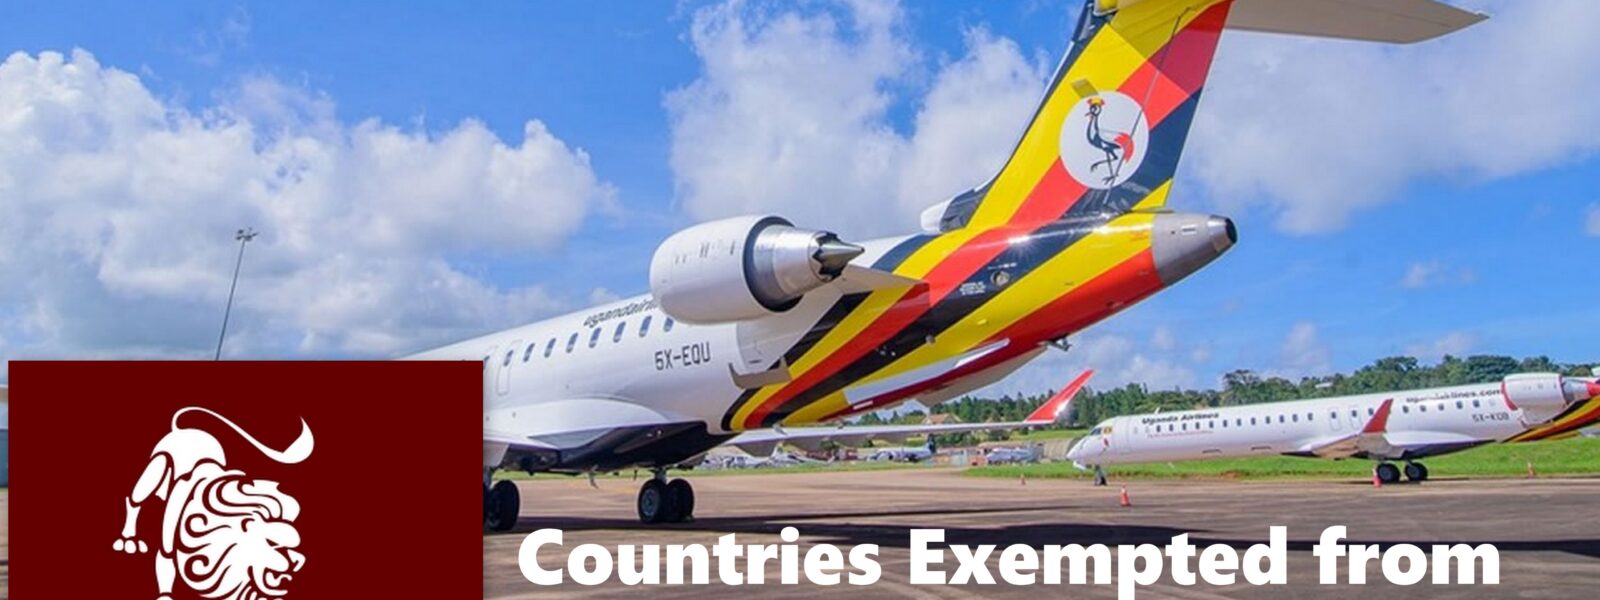 countries exempted from Visa fees into Uganda